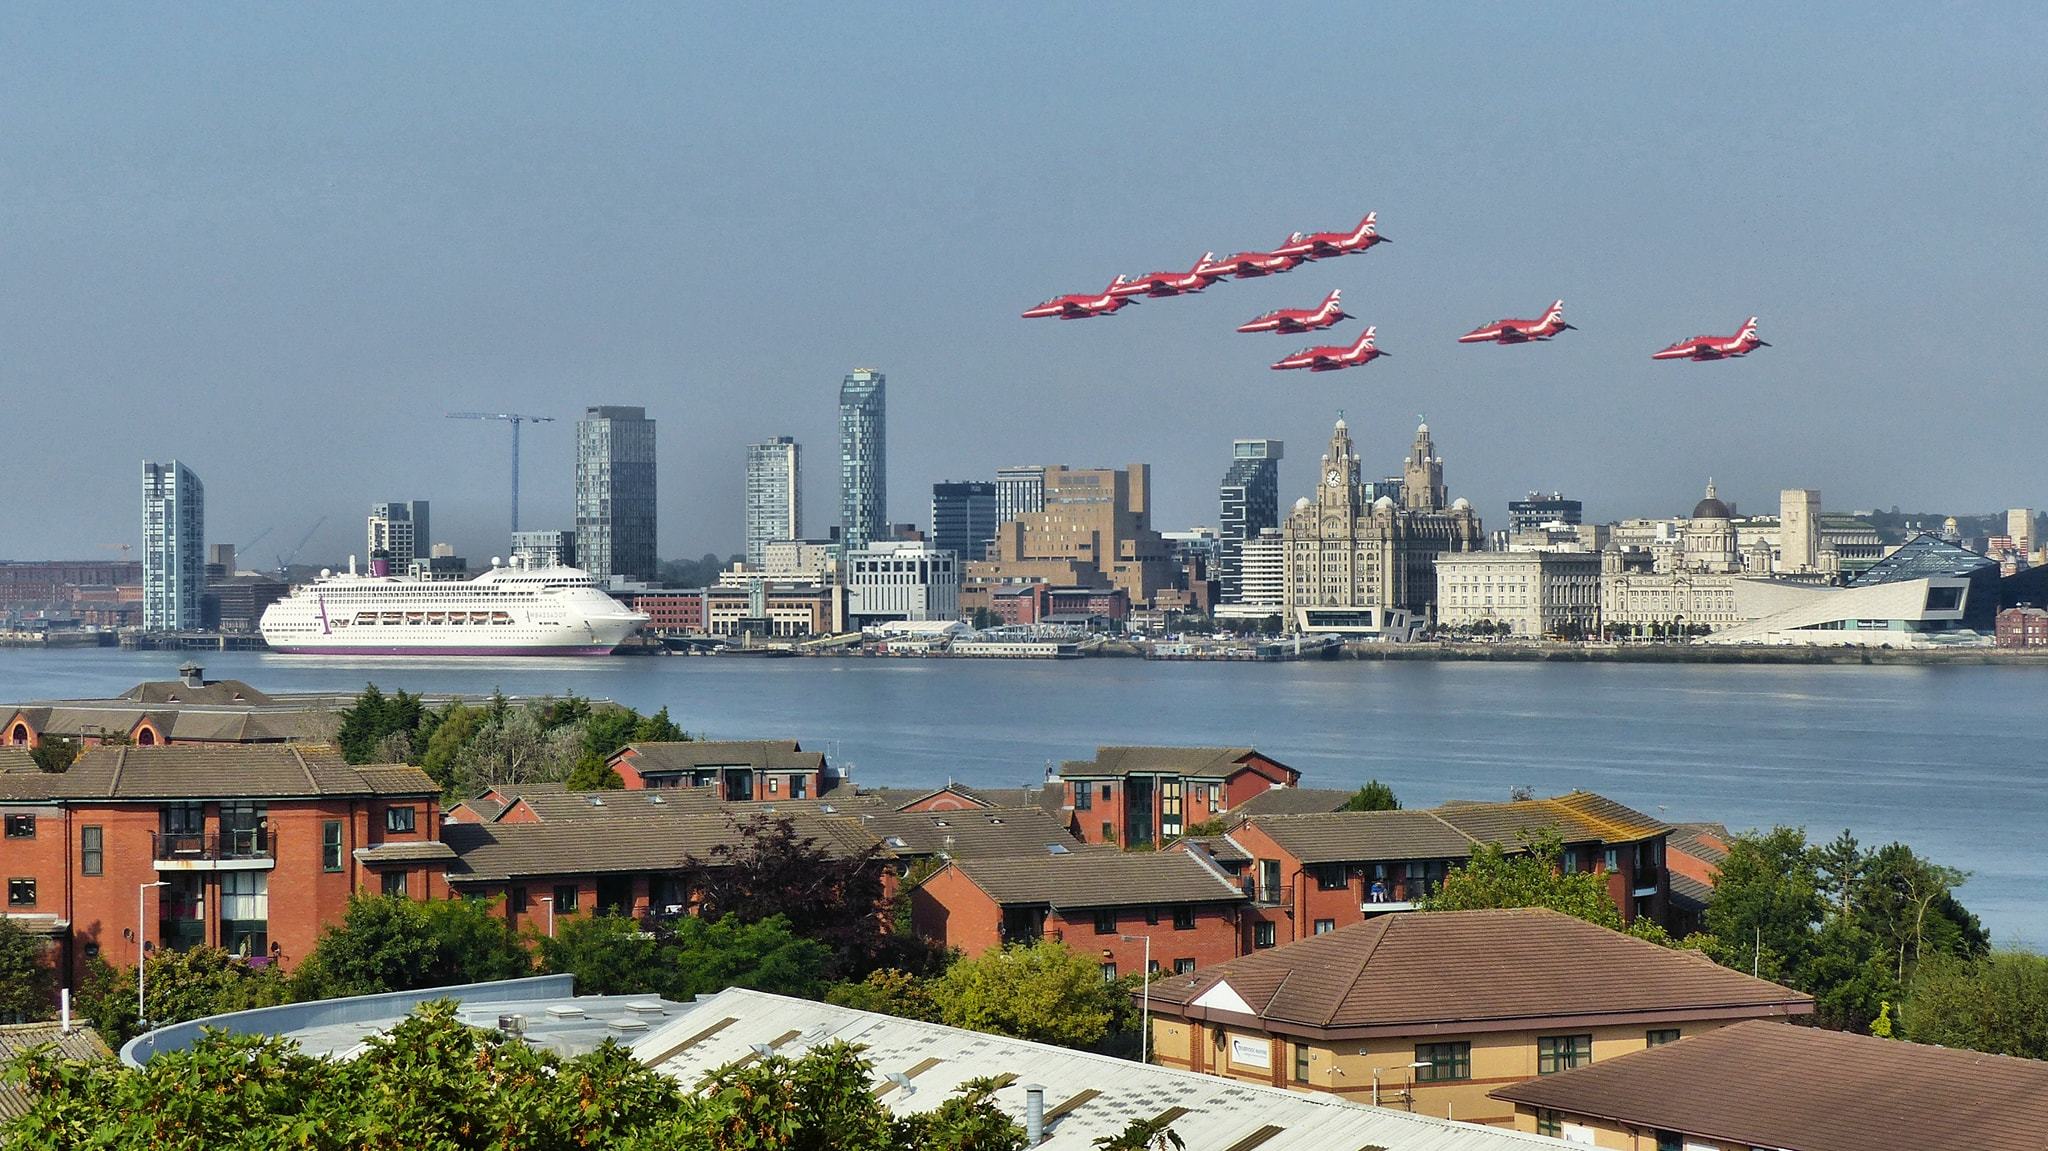 The Red Arrows by Gary Beale